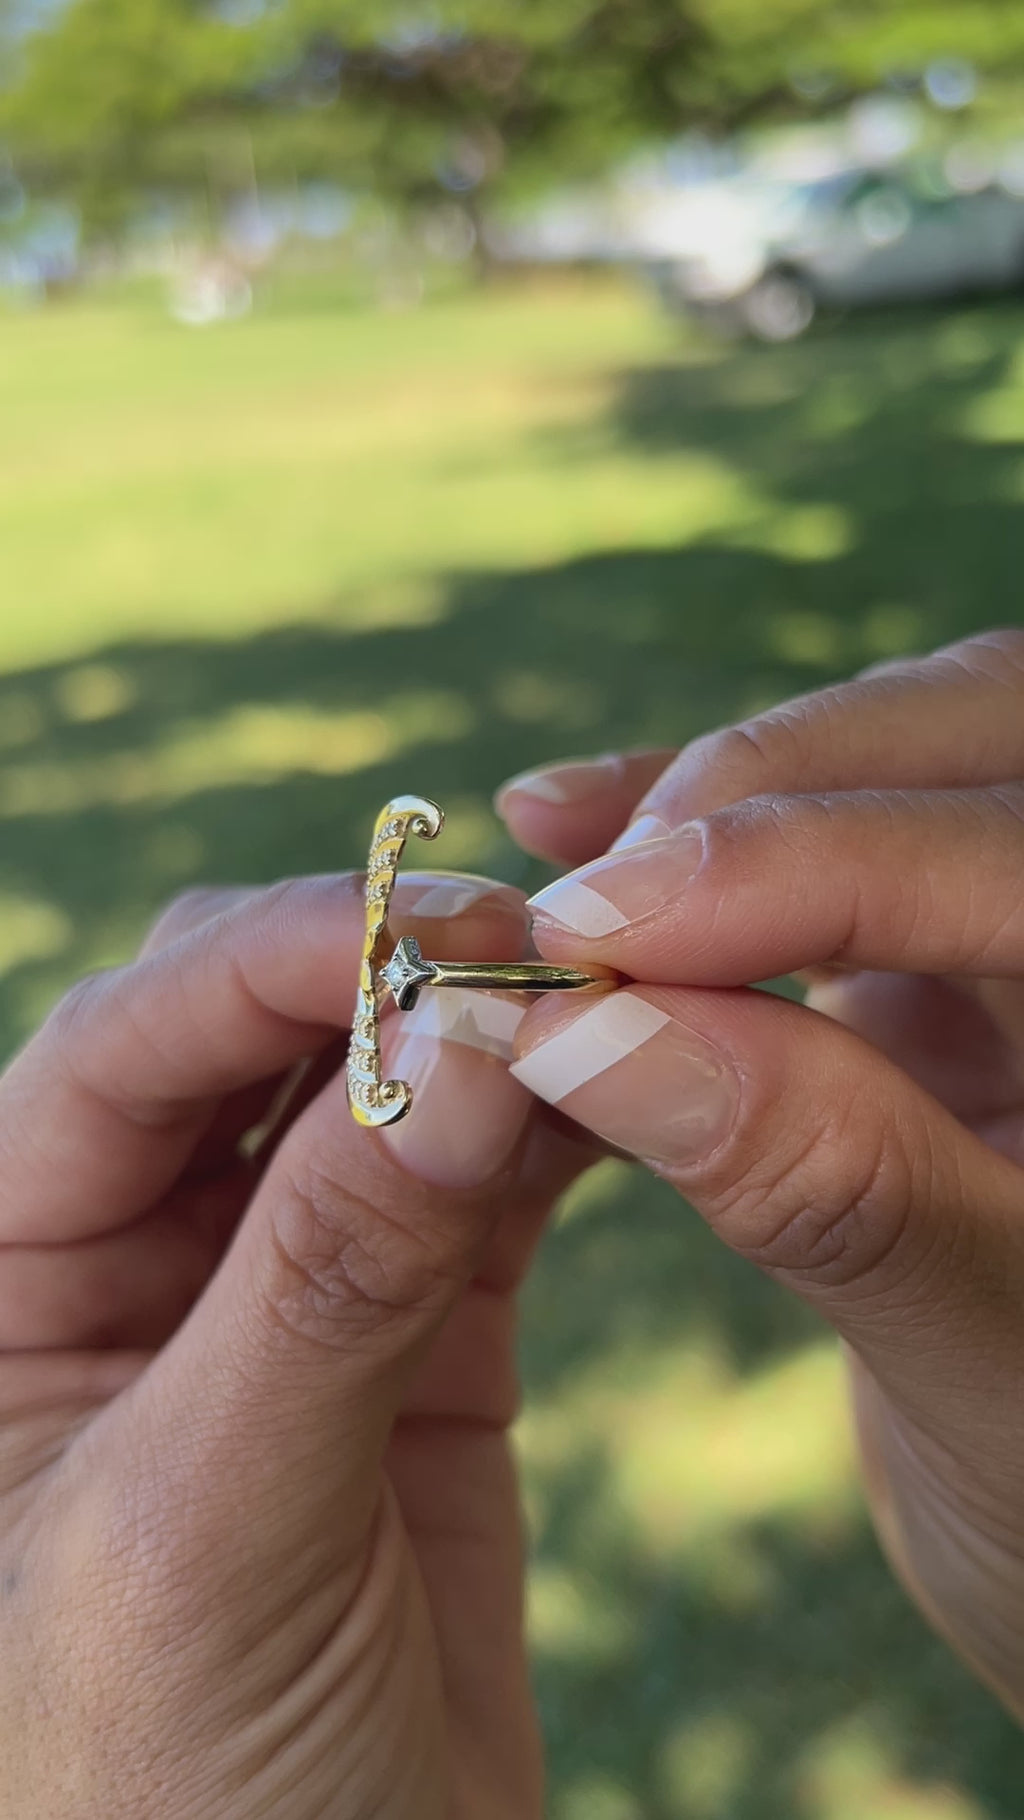 Video of a woman's hand with a Moon Mermaid Ring in Two Tone Gold with Diamonds - Maui Divers Jewelry